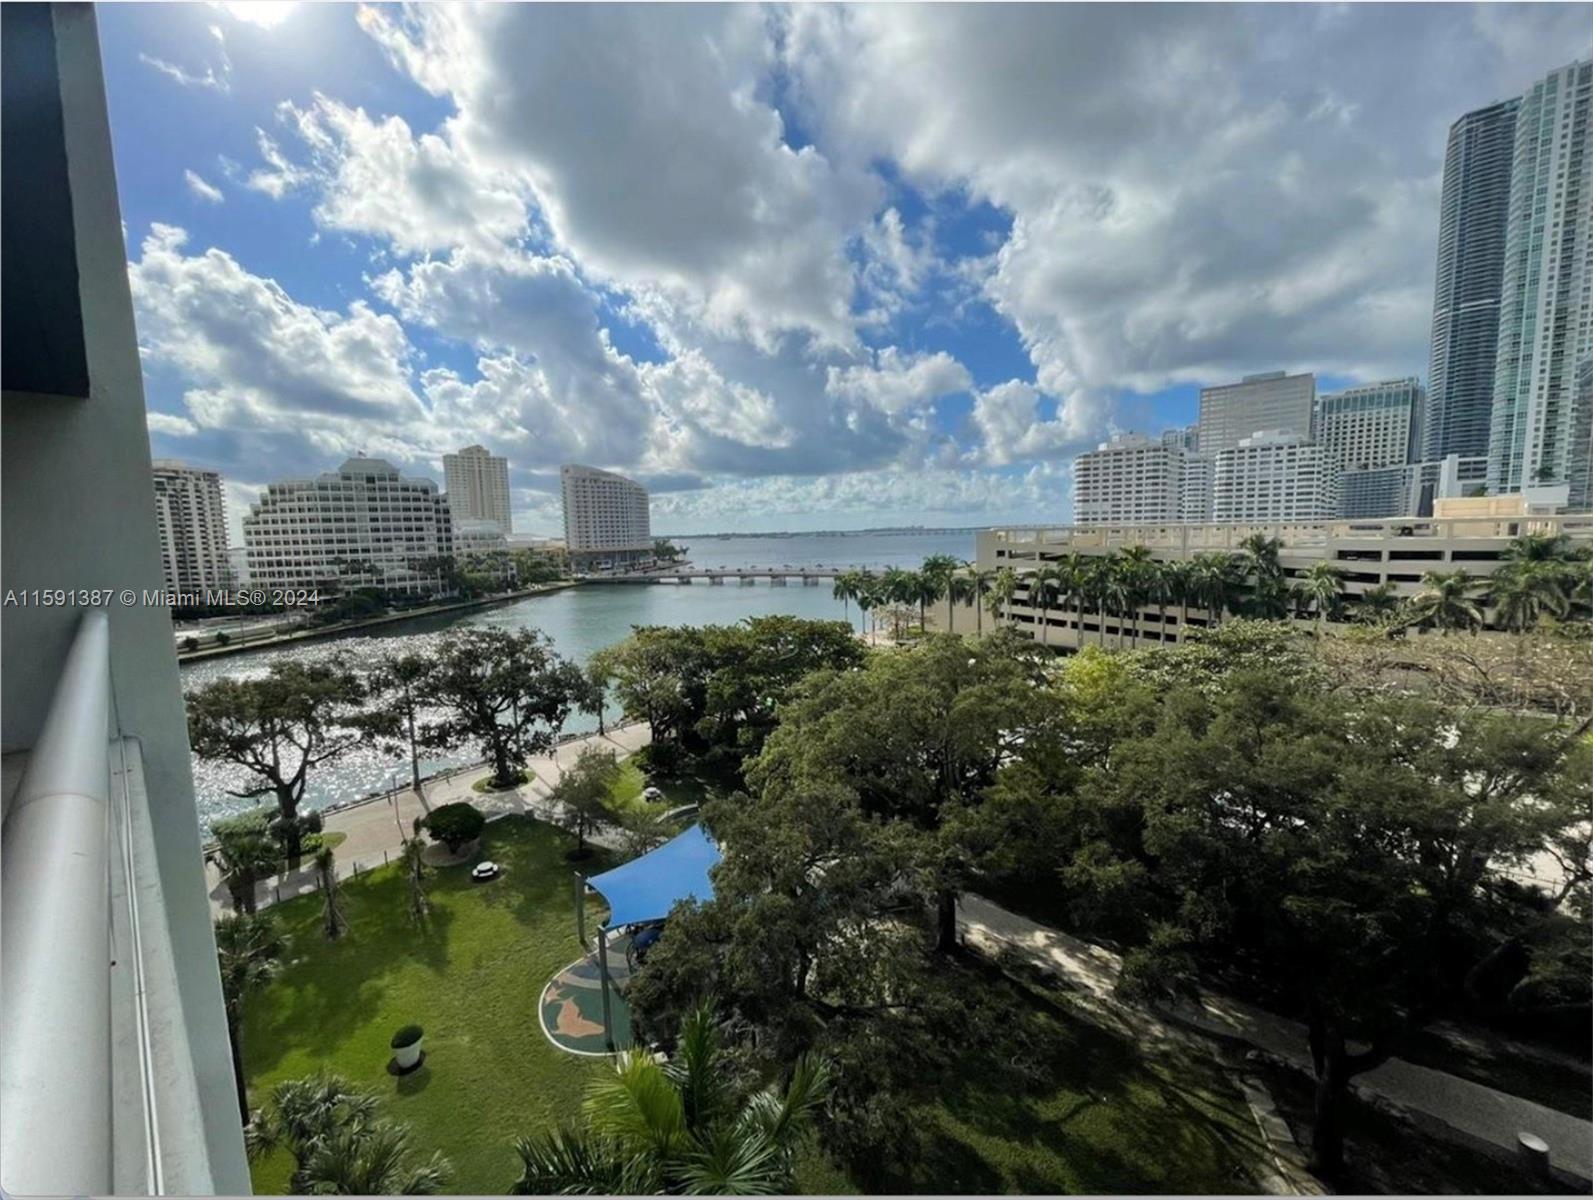 Spectacular water view from this huge 1 bed - 984 Sq.ft unit at Icon II one of the best in Brickell avenue. Enjoy tons of amenities and one of the best SPA's and Pools, world class restaurants! location, location, location applies for this property.

Tenant in place until june 30th 24 hours notice required to show the property text listing agent for faster response.